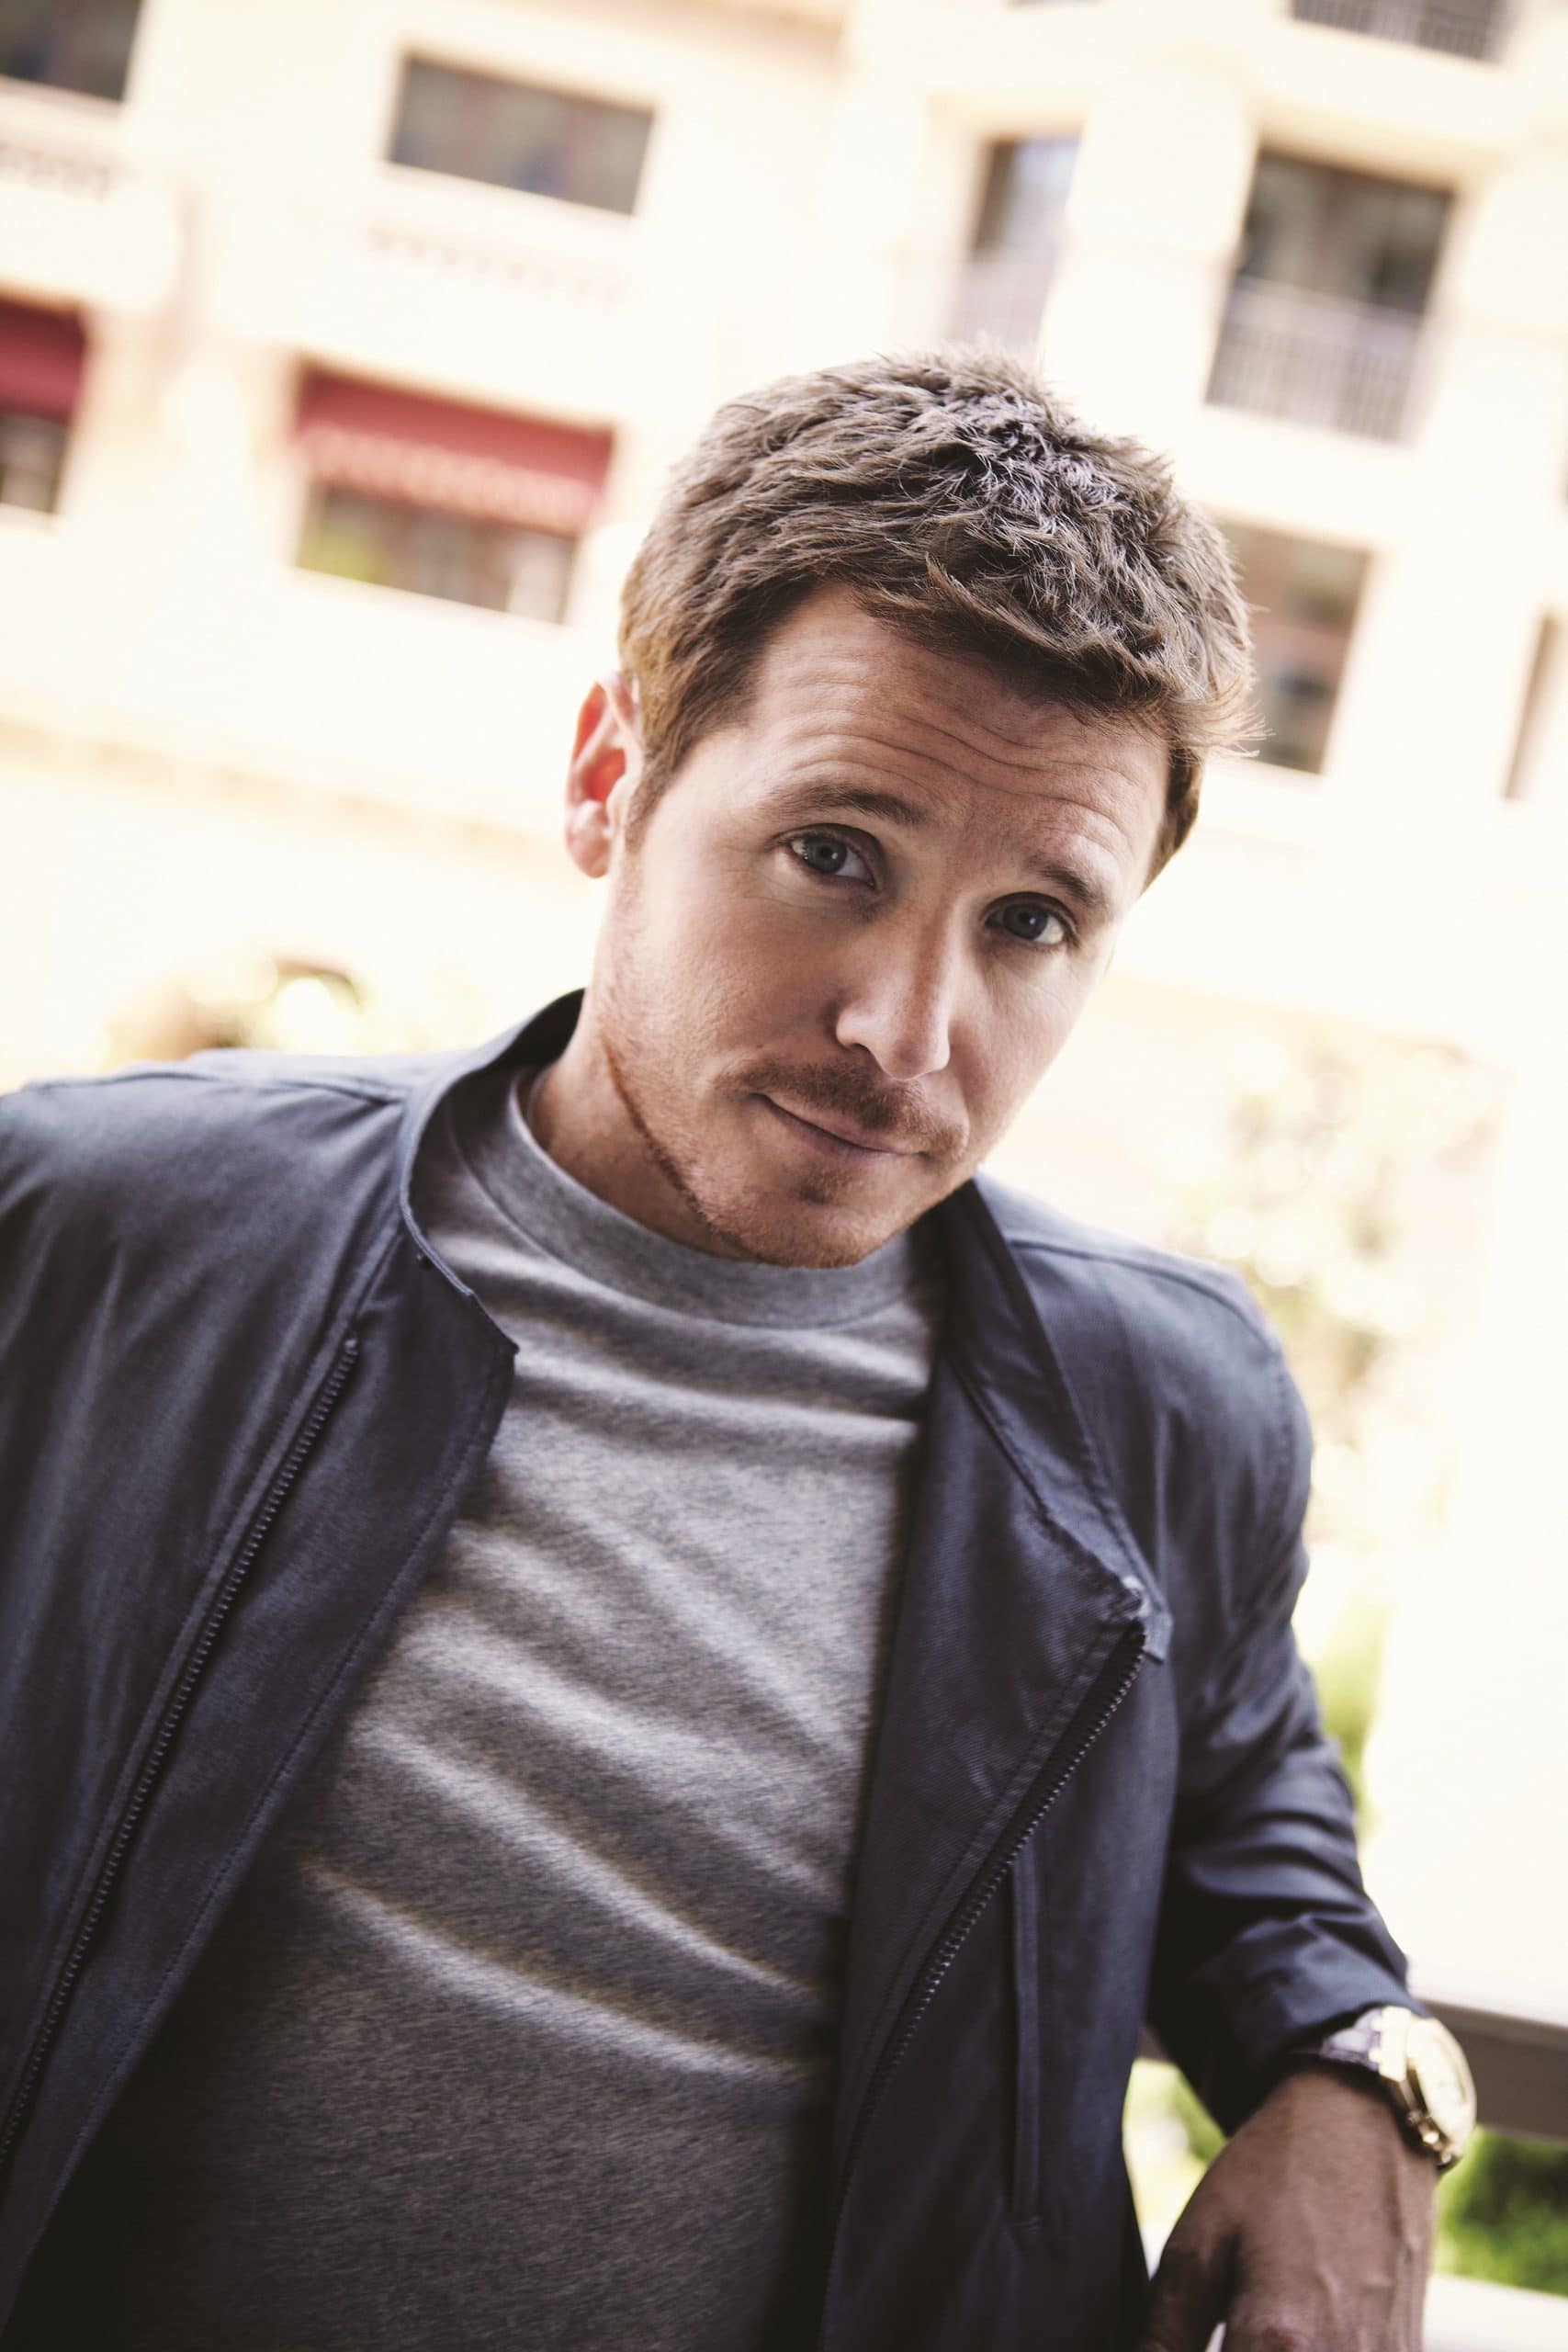 Tattoo kevin connolly Kevin Connolly